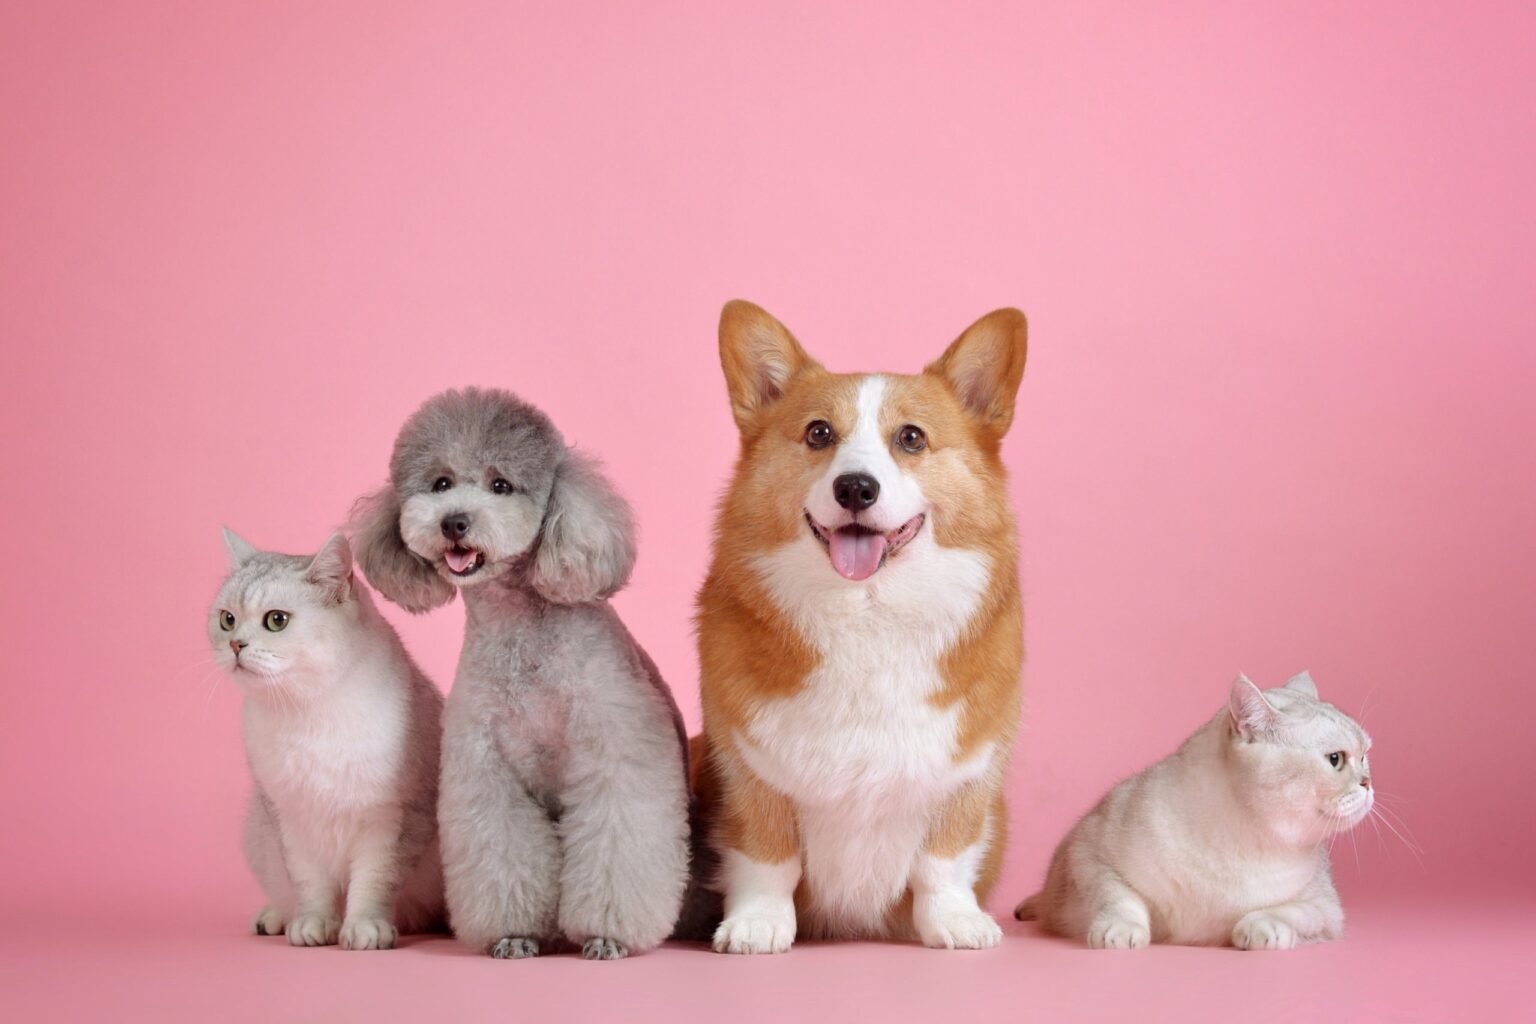 Animals Photos Dogs And Cats Together Pink Background